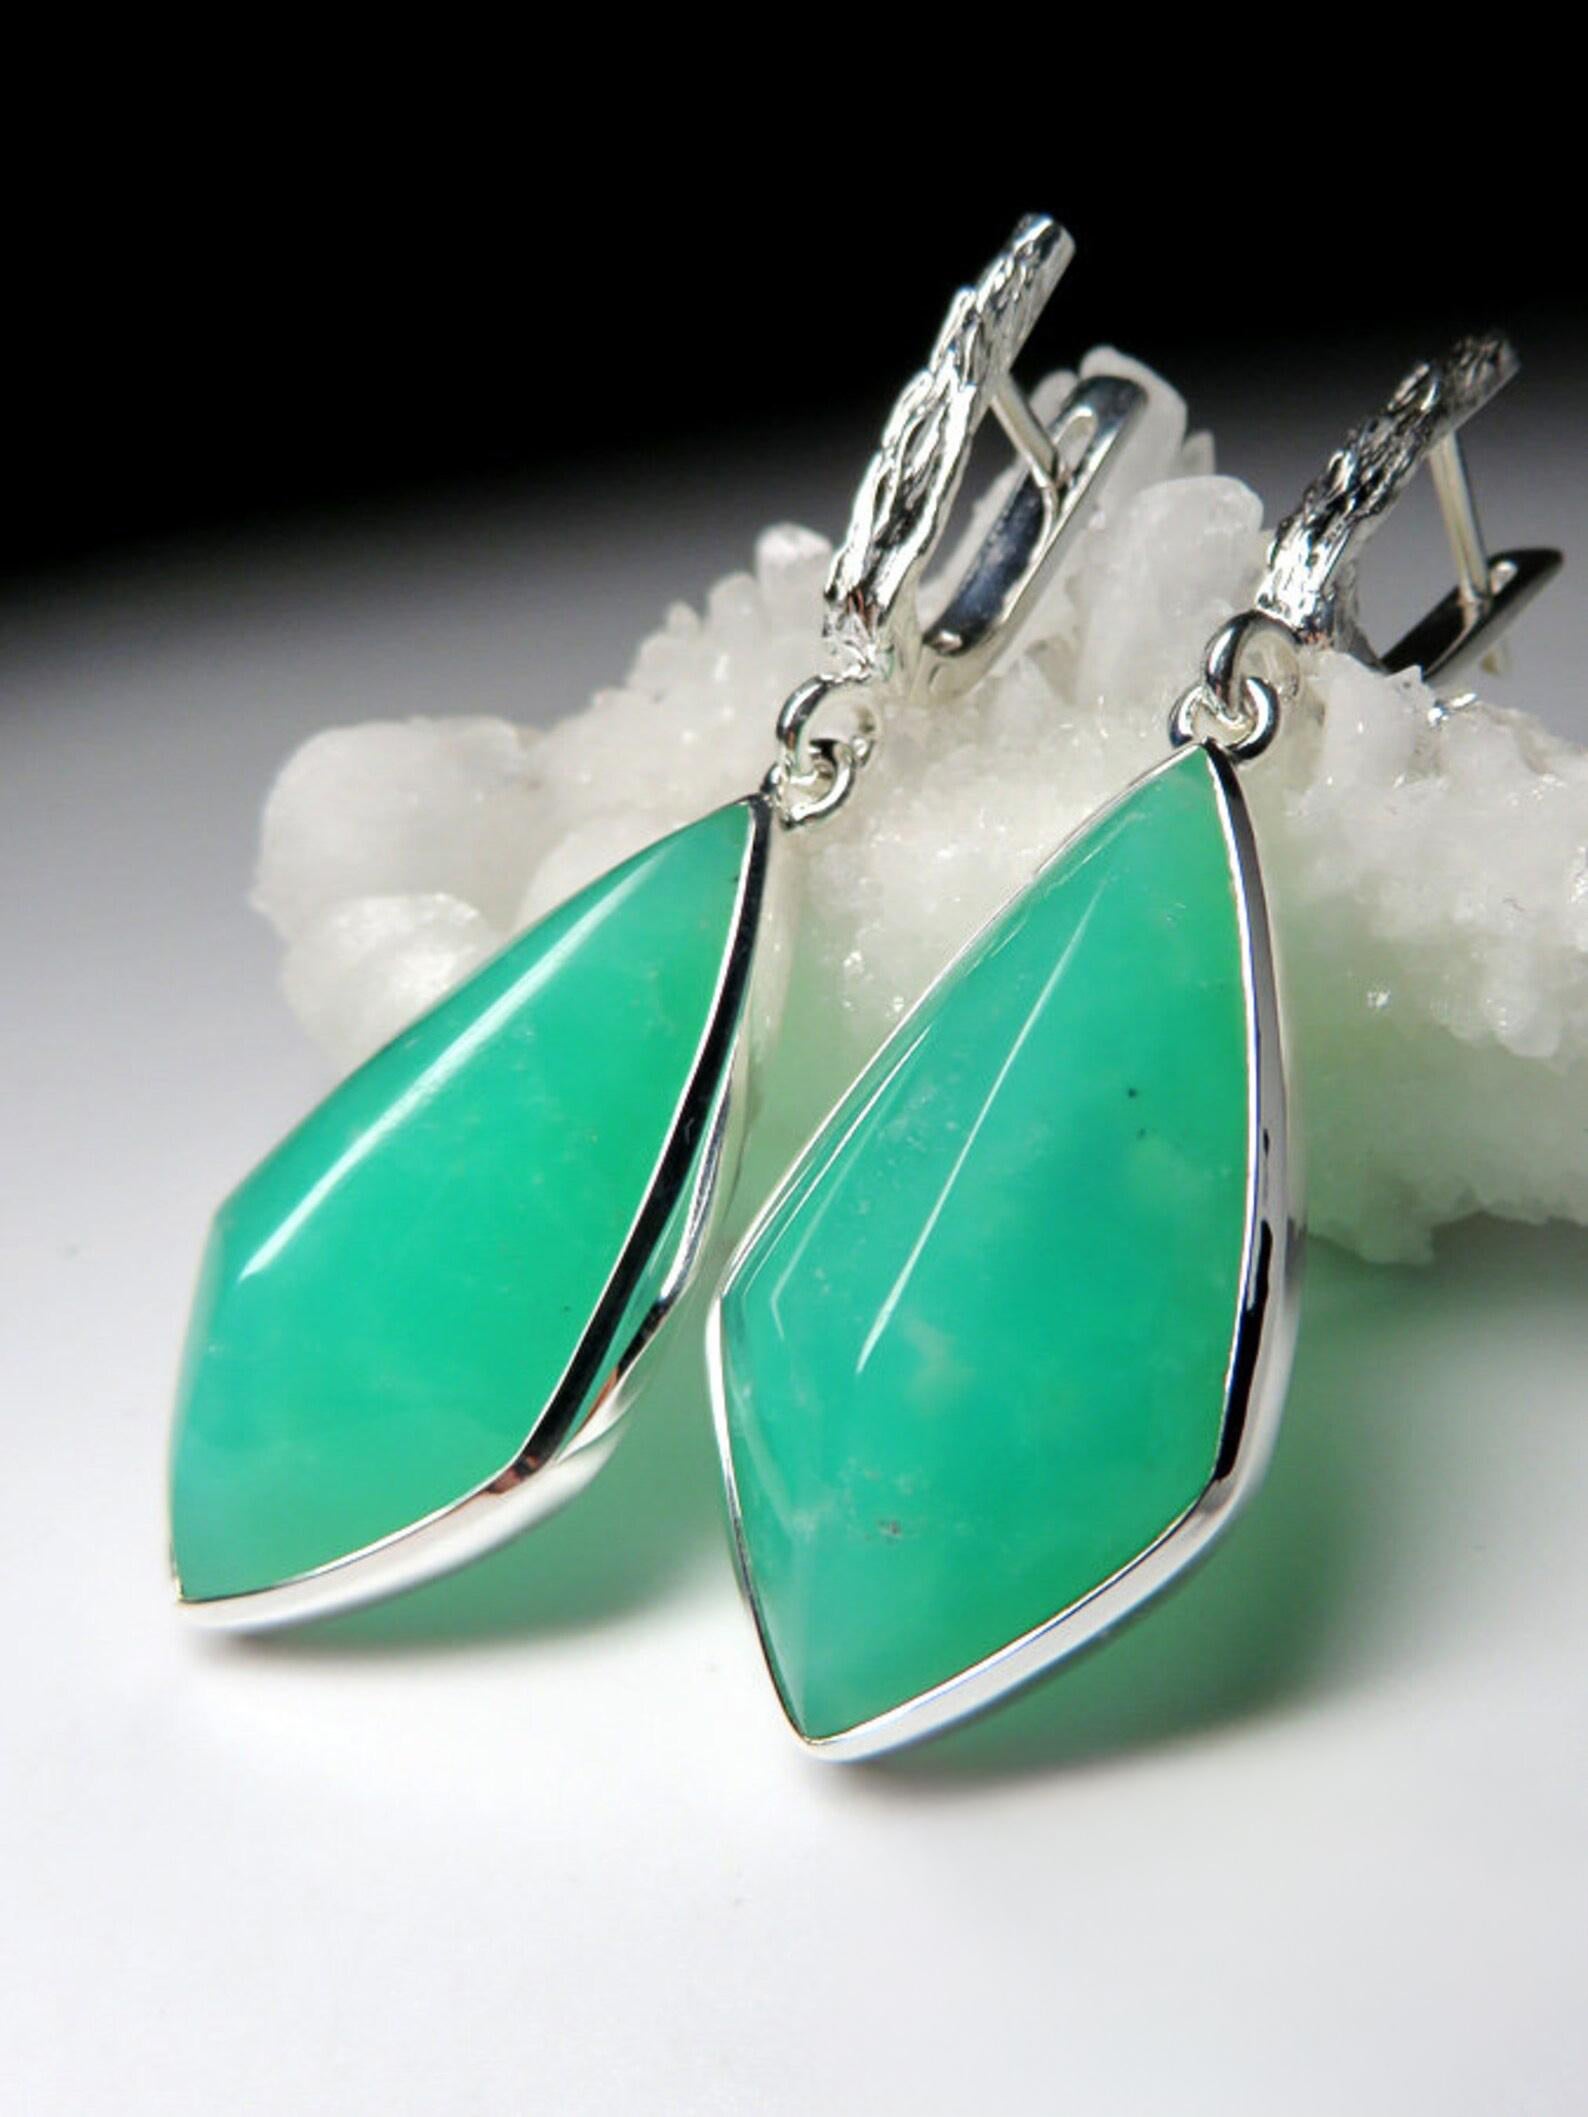 Big Chrysoprase Earrings silver Kite Shaped Luminous Mint Green Natural Gemstone For Sale 1